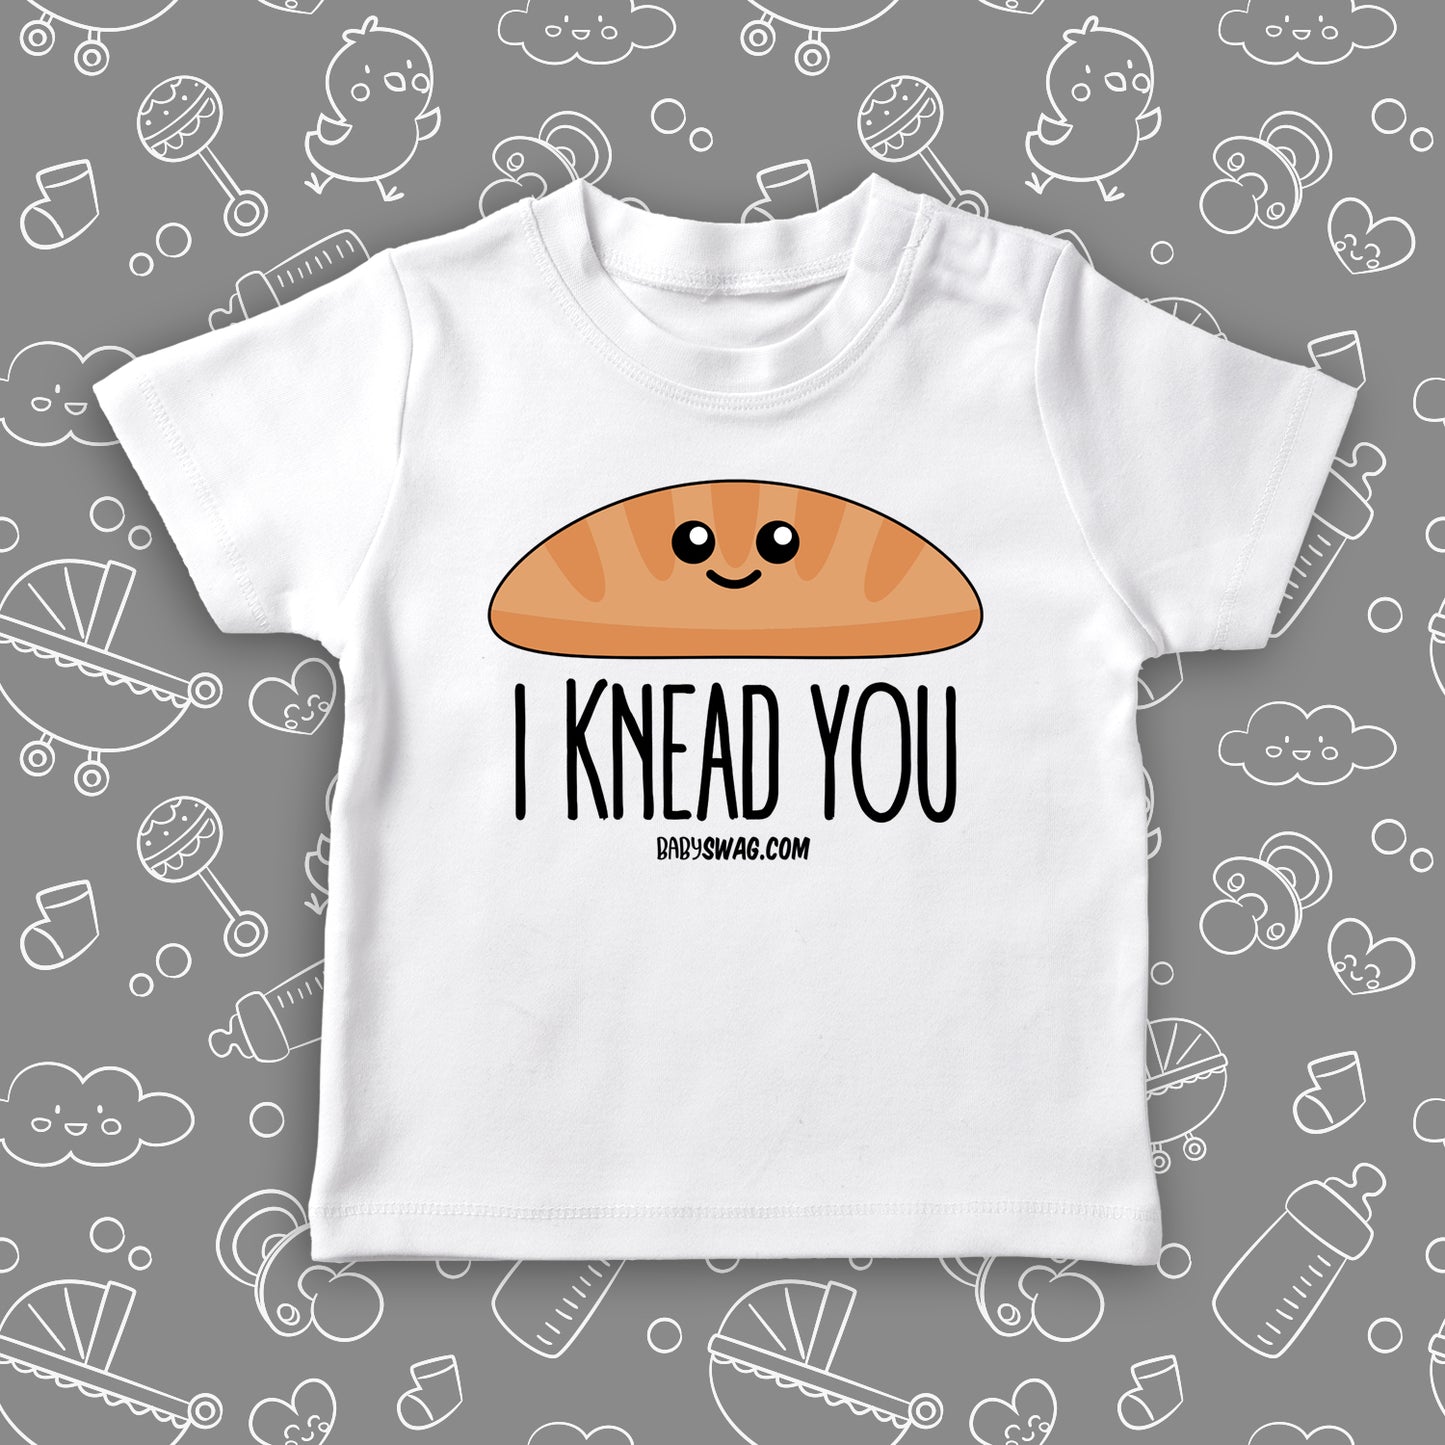 Cool toddler shirt saying "I Knead You", in white. 